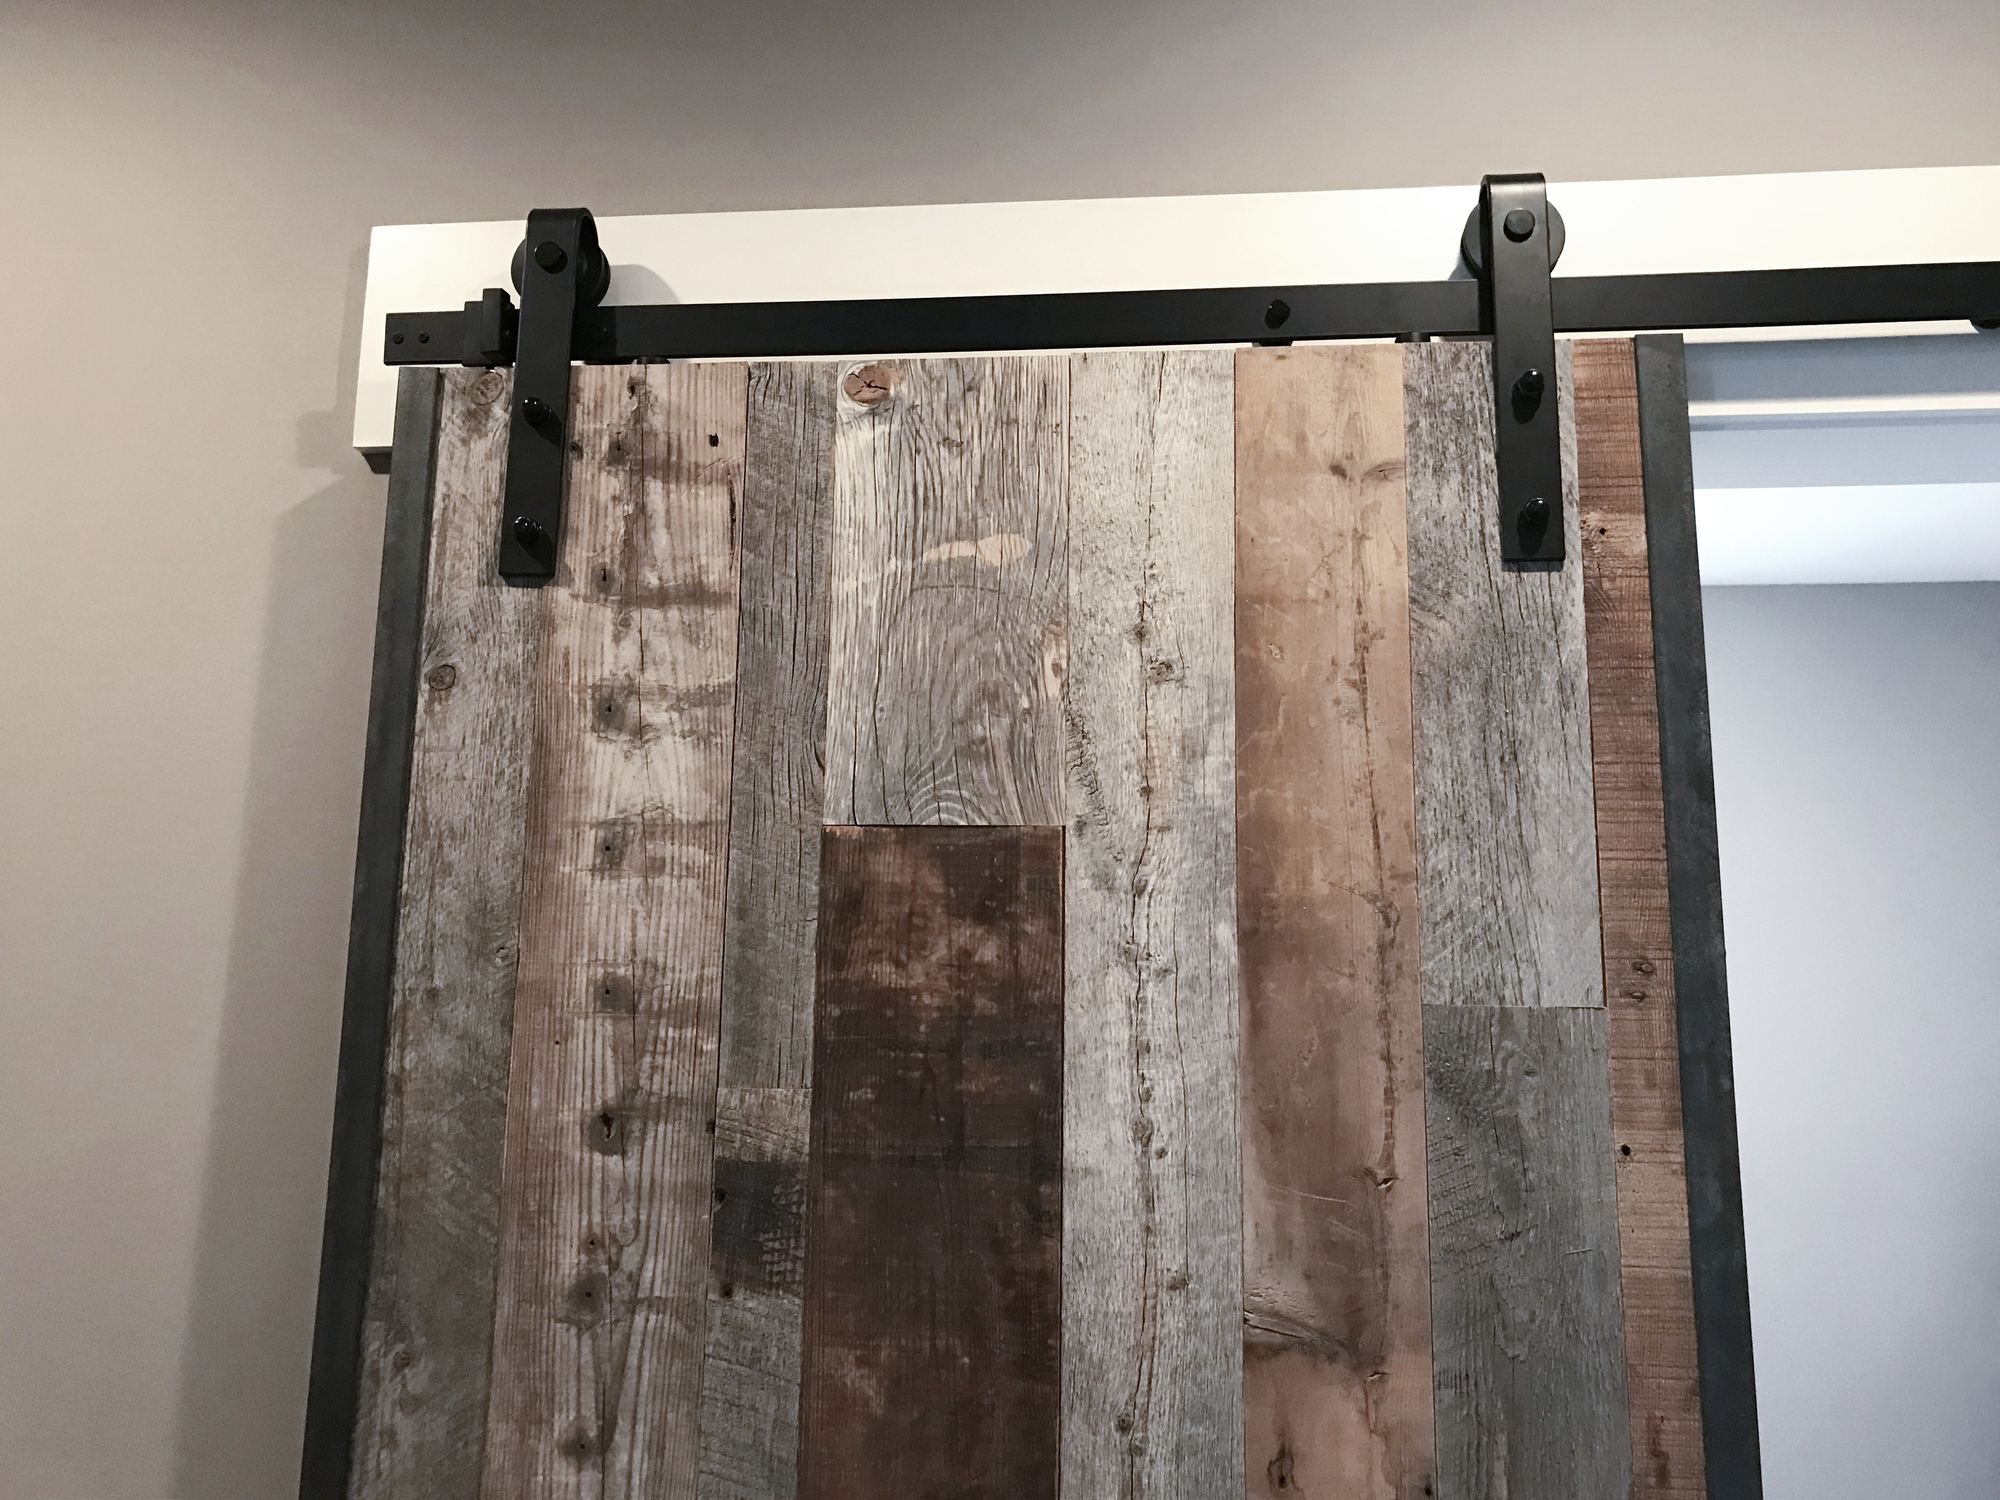 A rustic wooden barn door mounted on a sliding track above a doorway